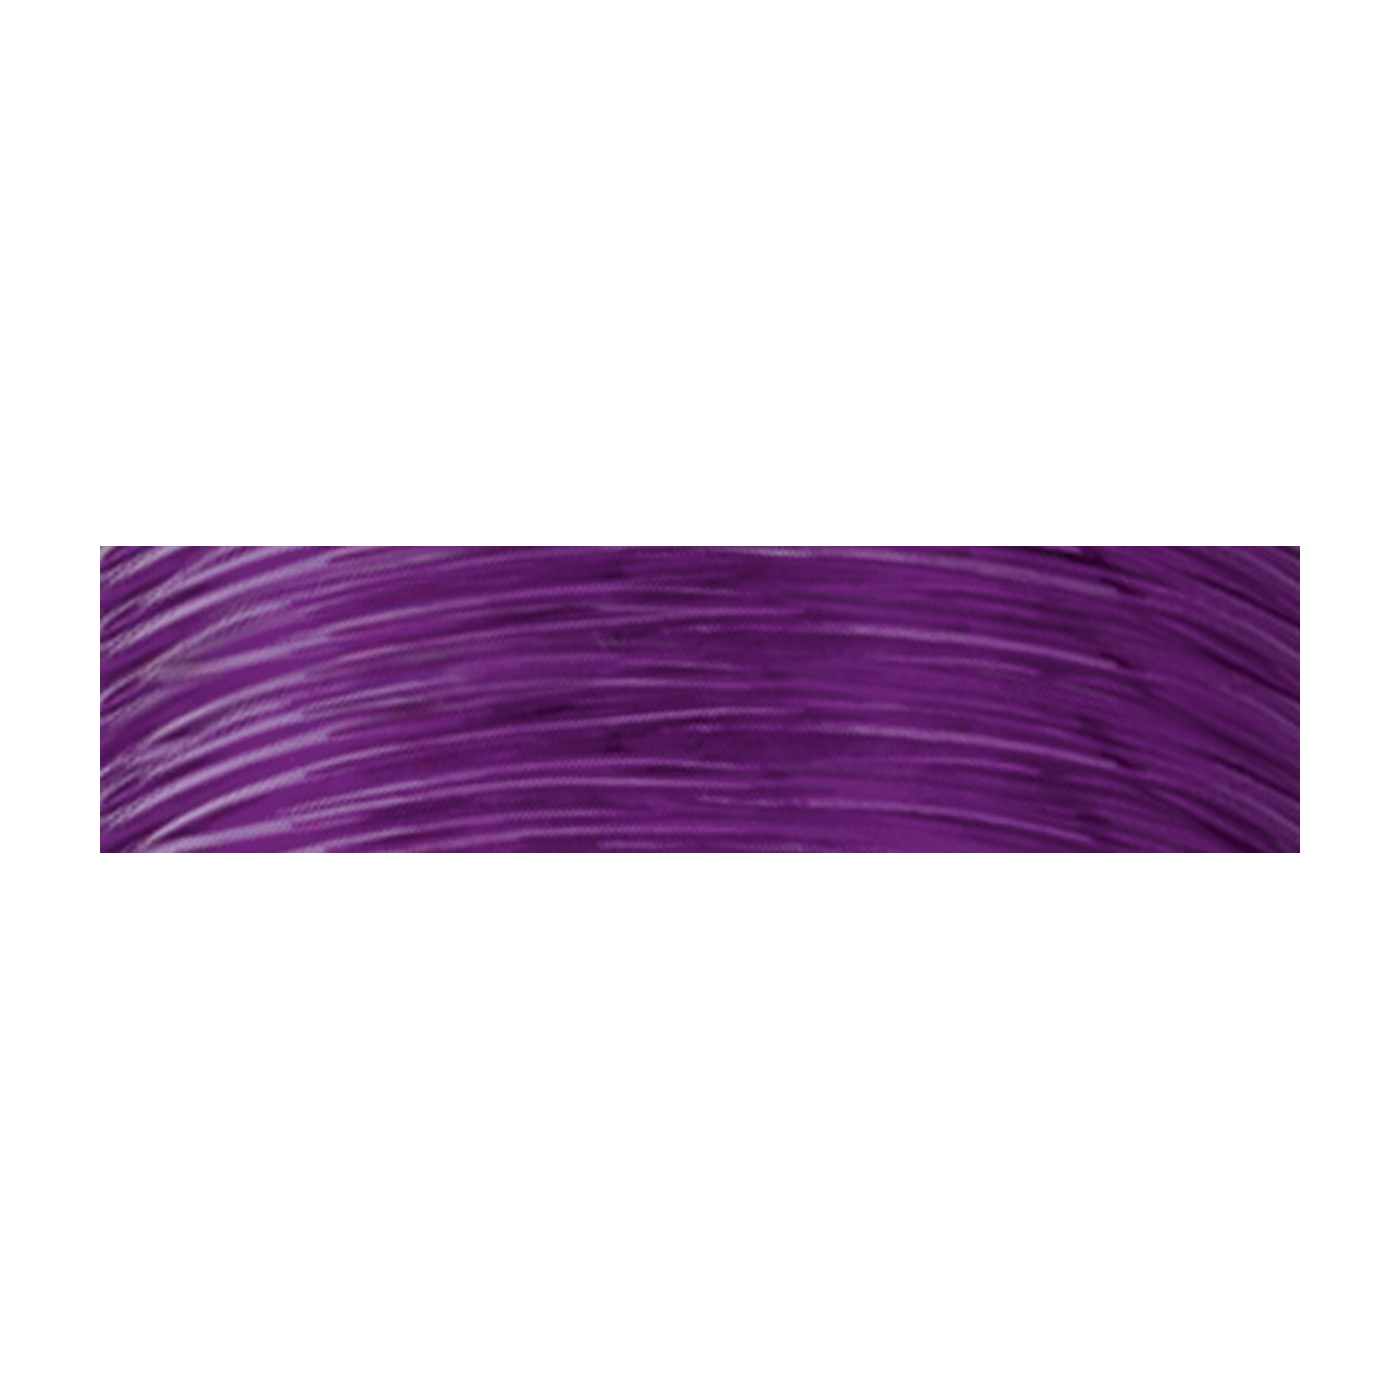 Griffin Jewelry Elastic Cord Bindfaden, lila, ø 1,0 mm - 25 m